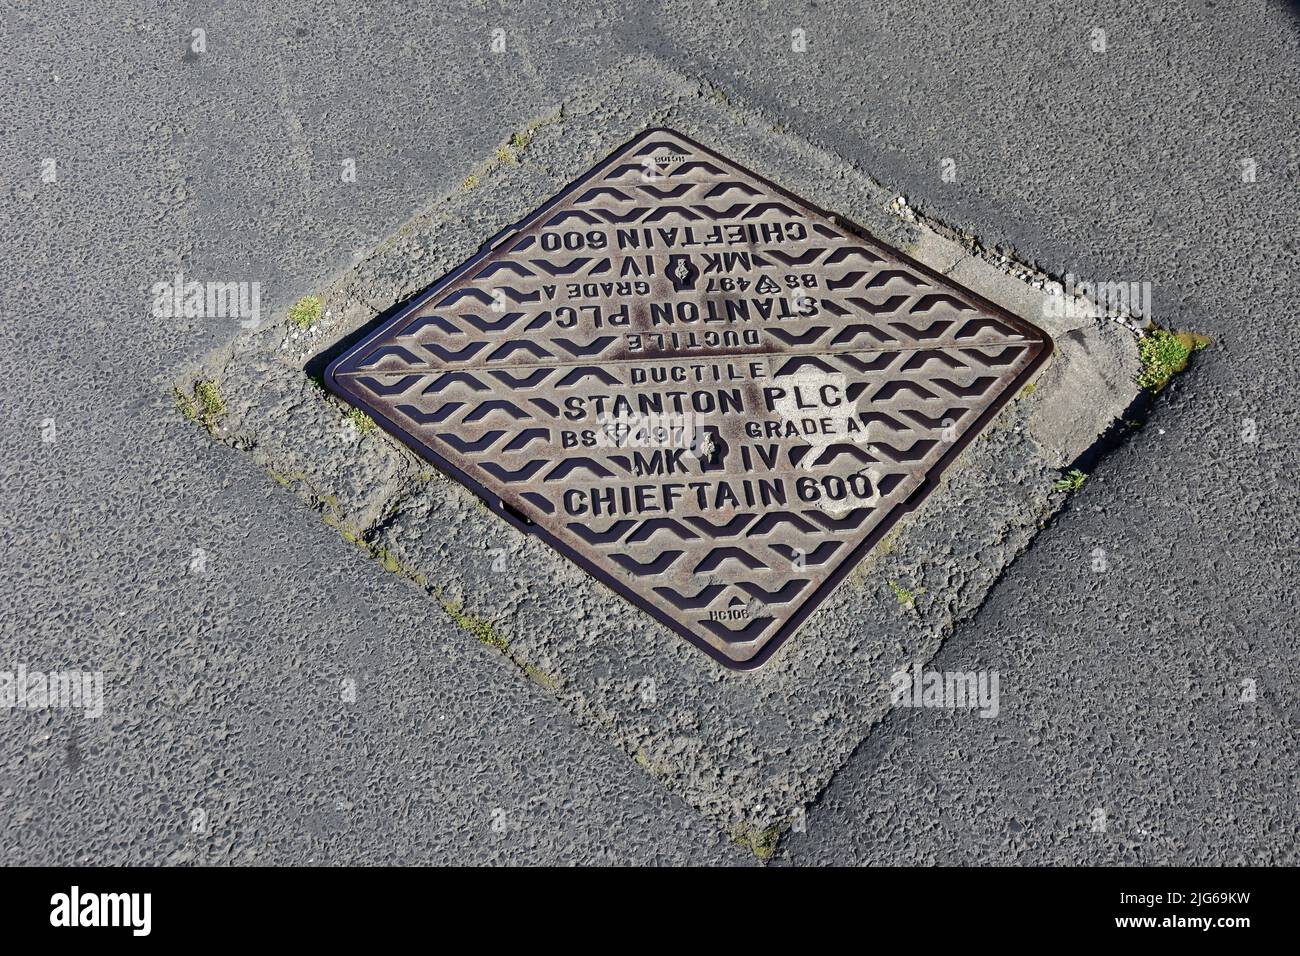 Prestatyn, UK. Jun 22, 2022. A manhole cover which was manufactured by Stanton PLC. Stock Photo